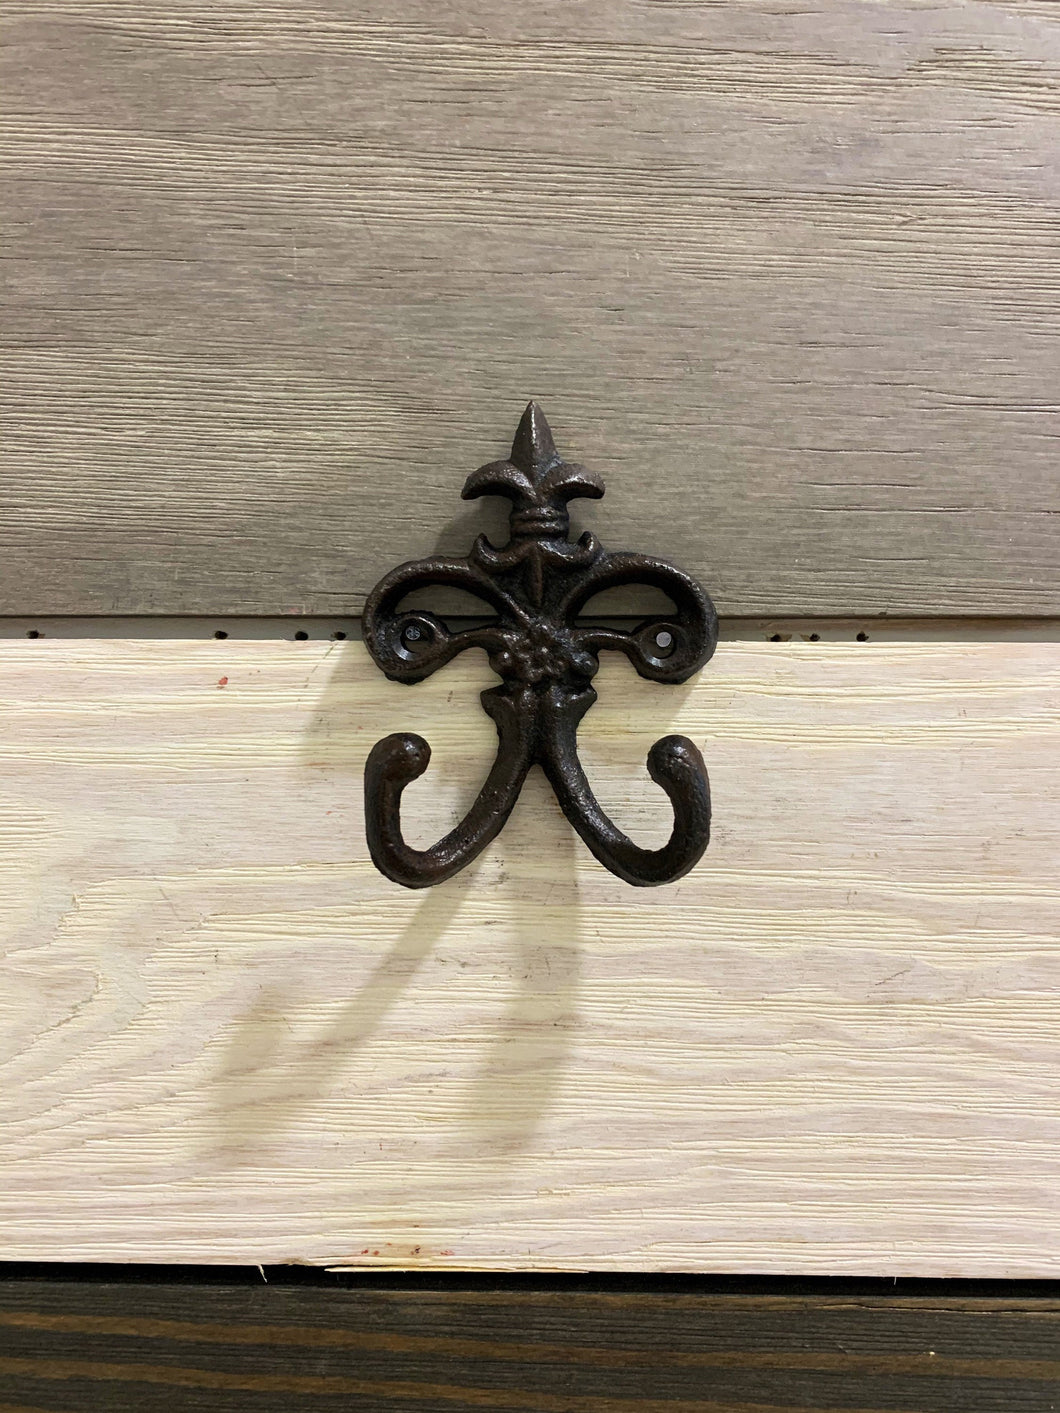 Cast Iron Wall Hook, Bedroom Wall Hanger, Coatroom Organizer, Outdoor Space Saver, Storage System, Wall Hanging, Beach Decor, Gift